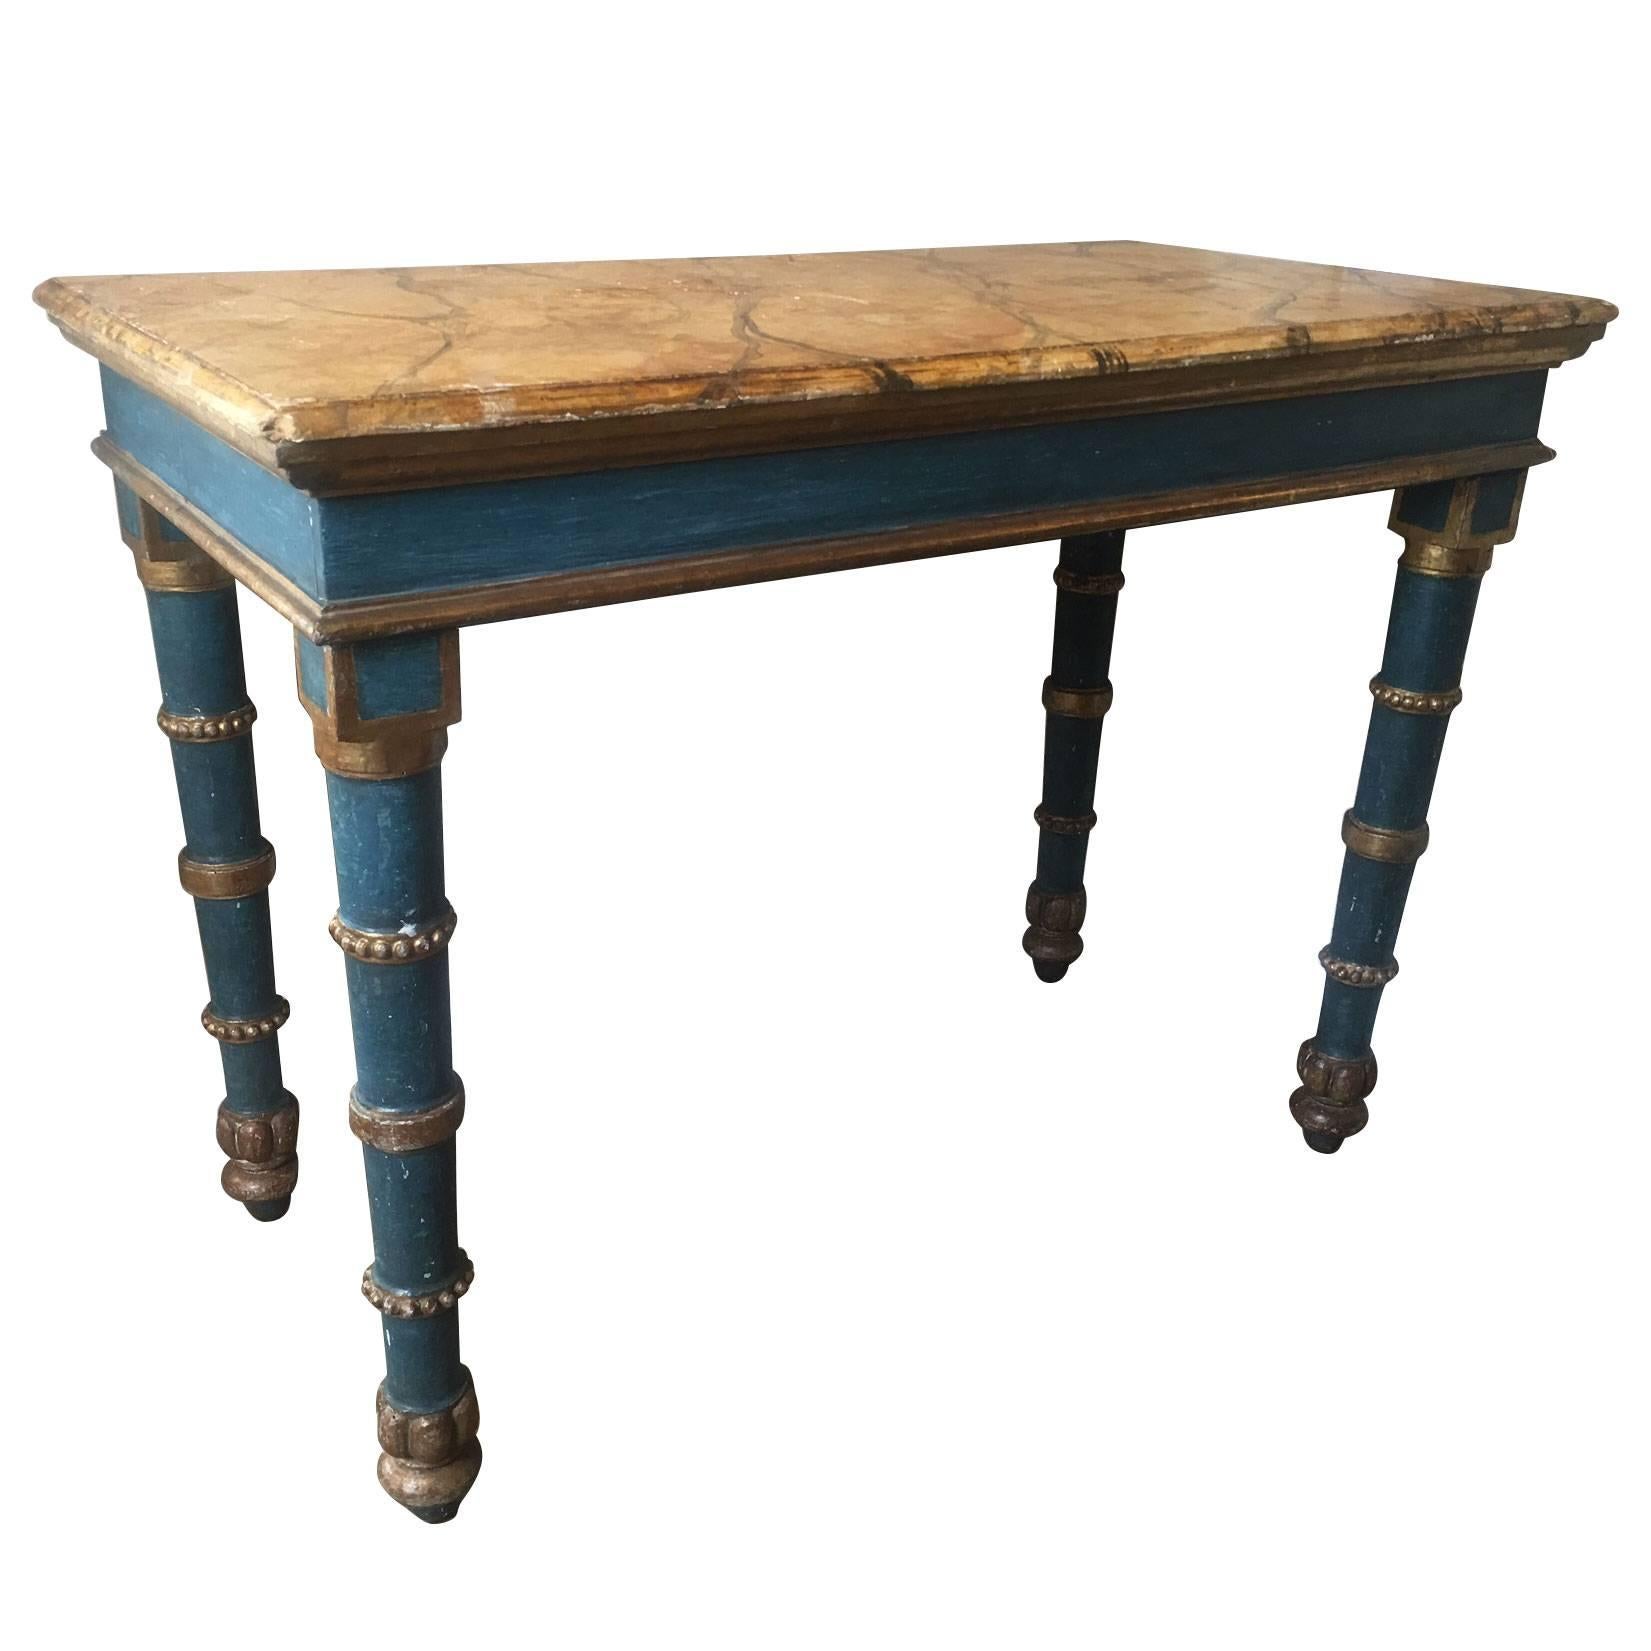 Italian 18th Century Painted and Giltwood Table with Faux Marble Top For Sale